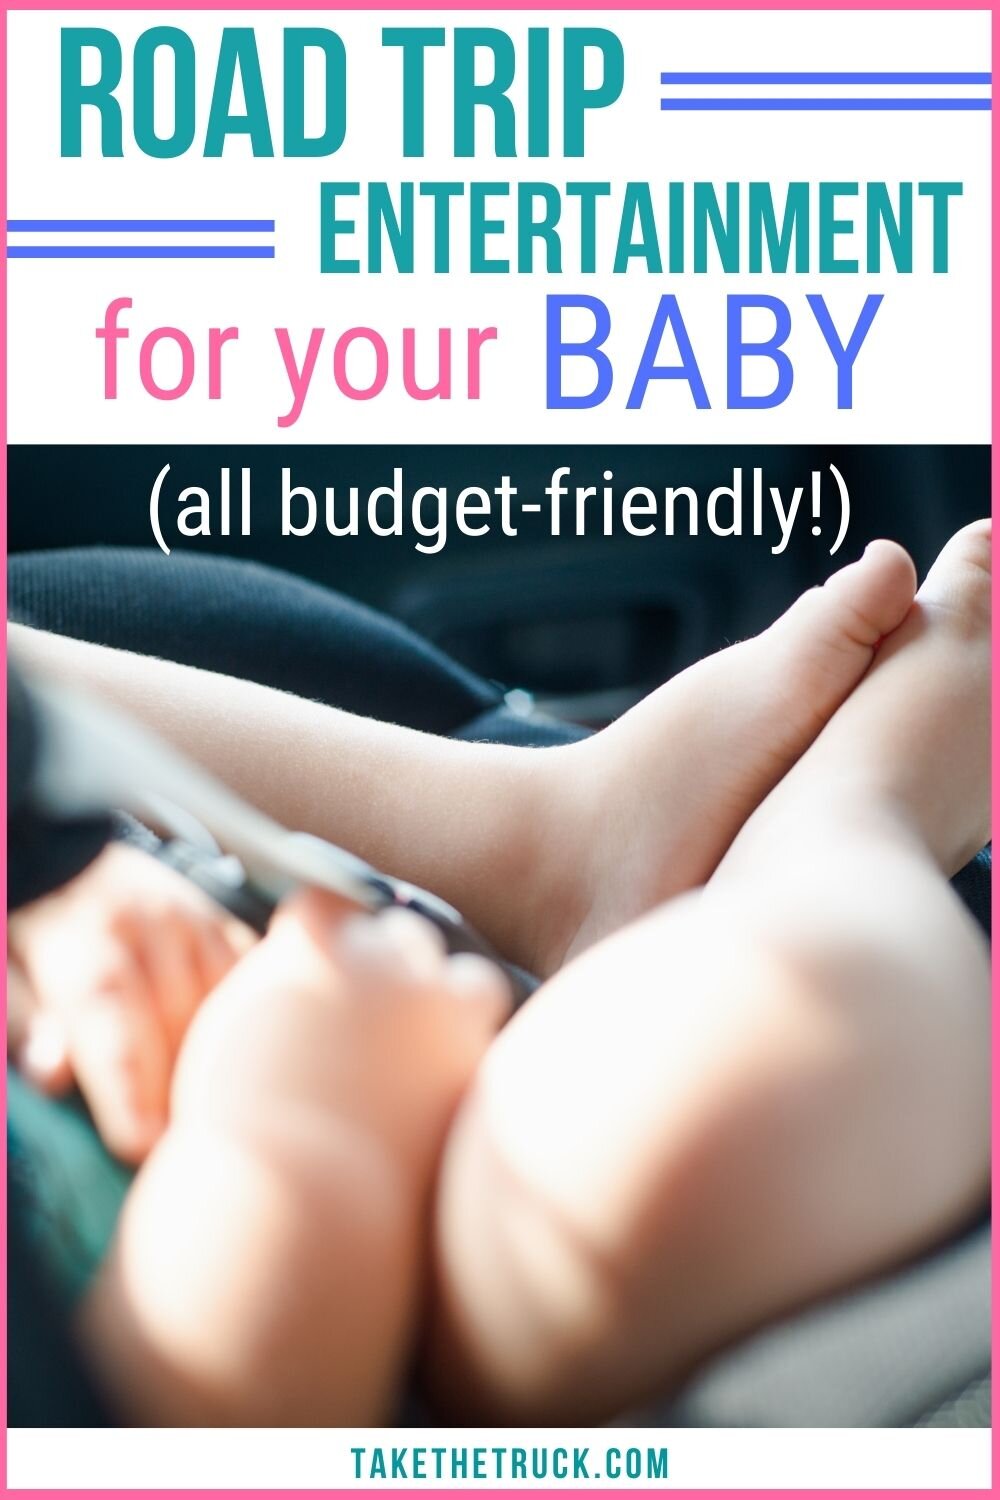 If you’re taking a budget road trip with your baby, read this post for inexpensive travel toys just right for a baby or one year old. Don’t spend your money on road trip travel toys for baby!